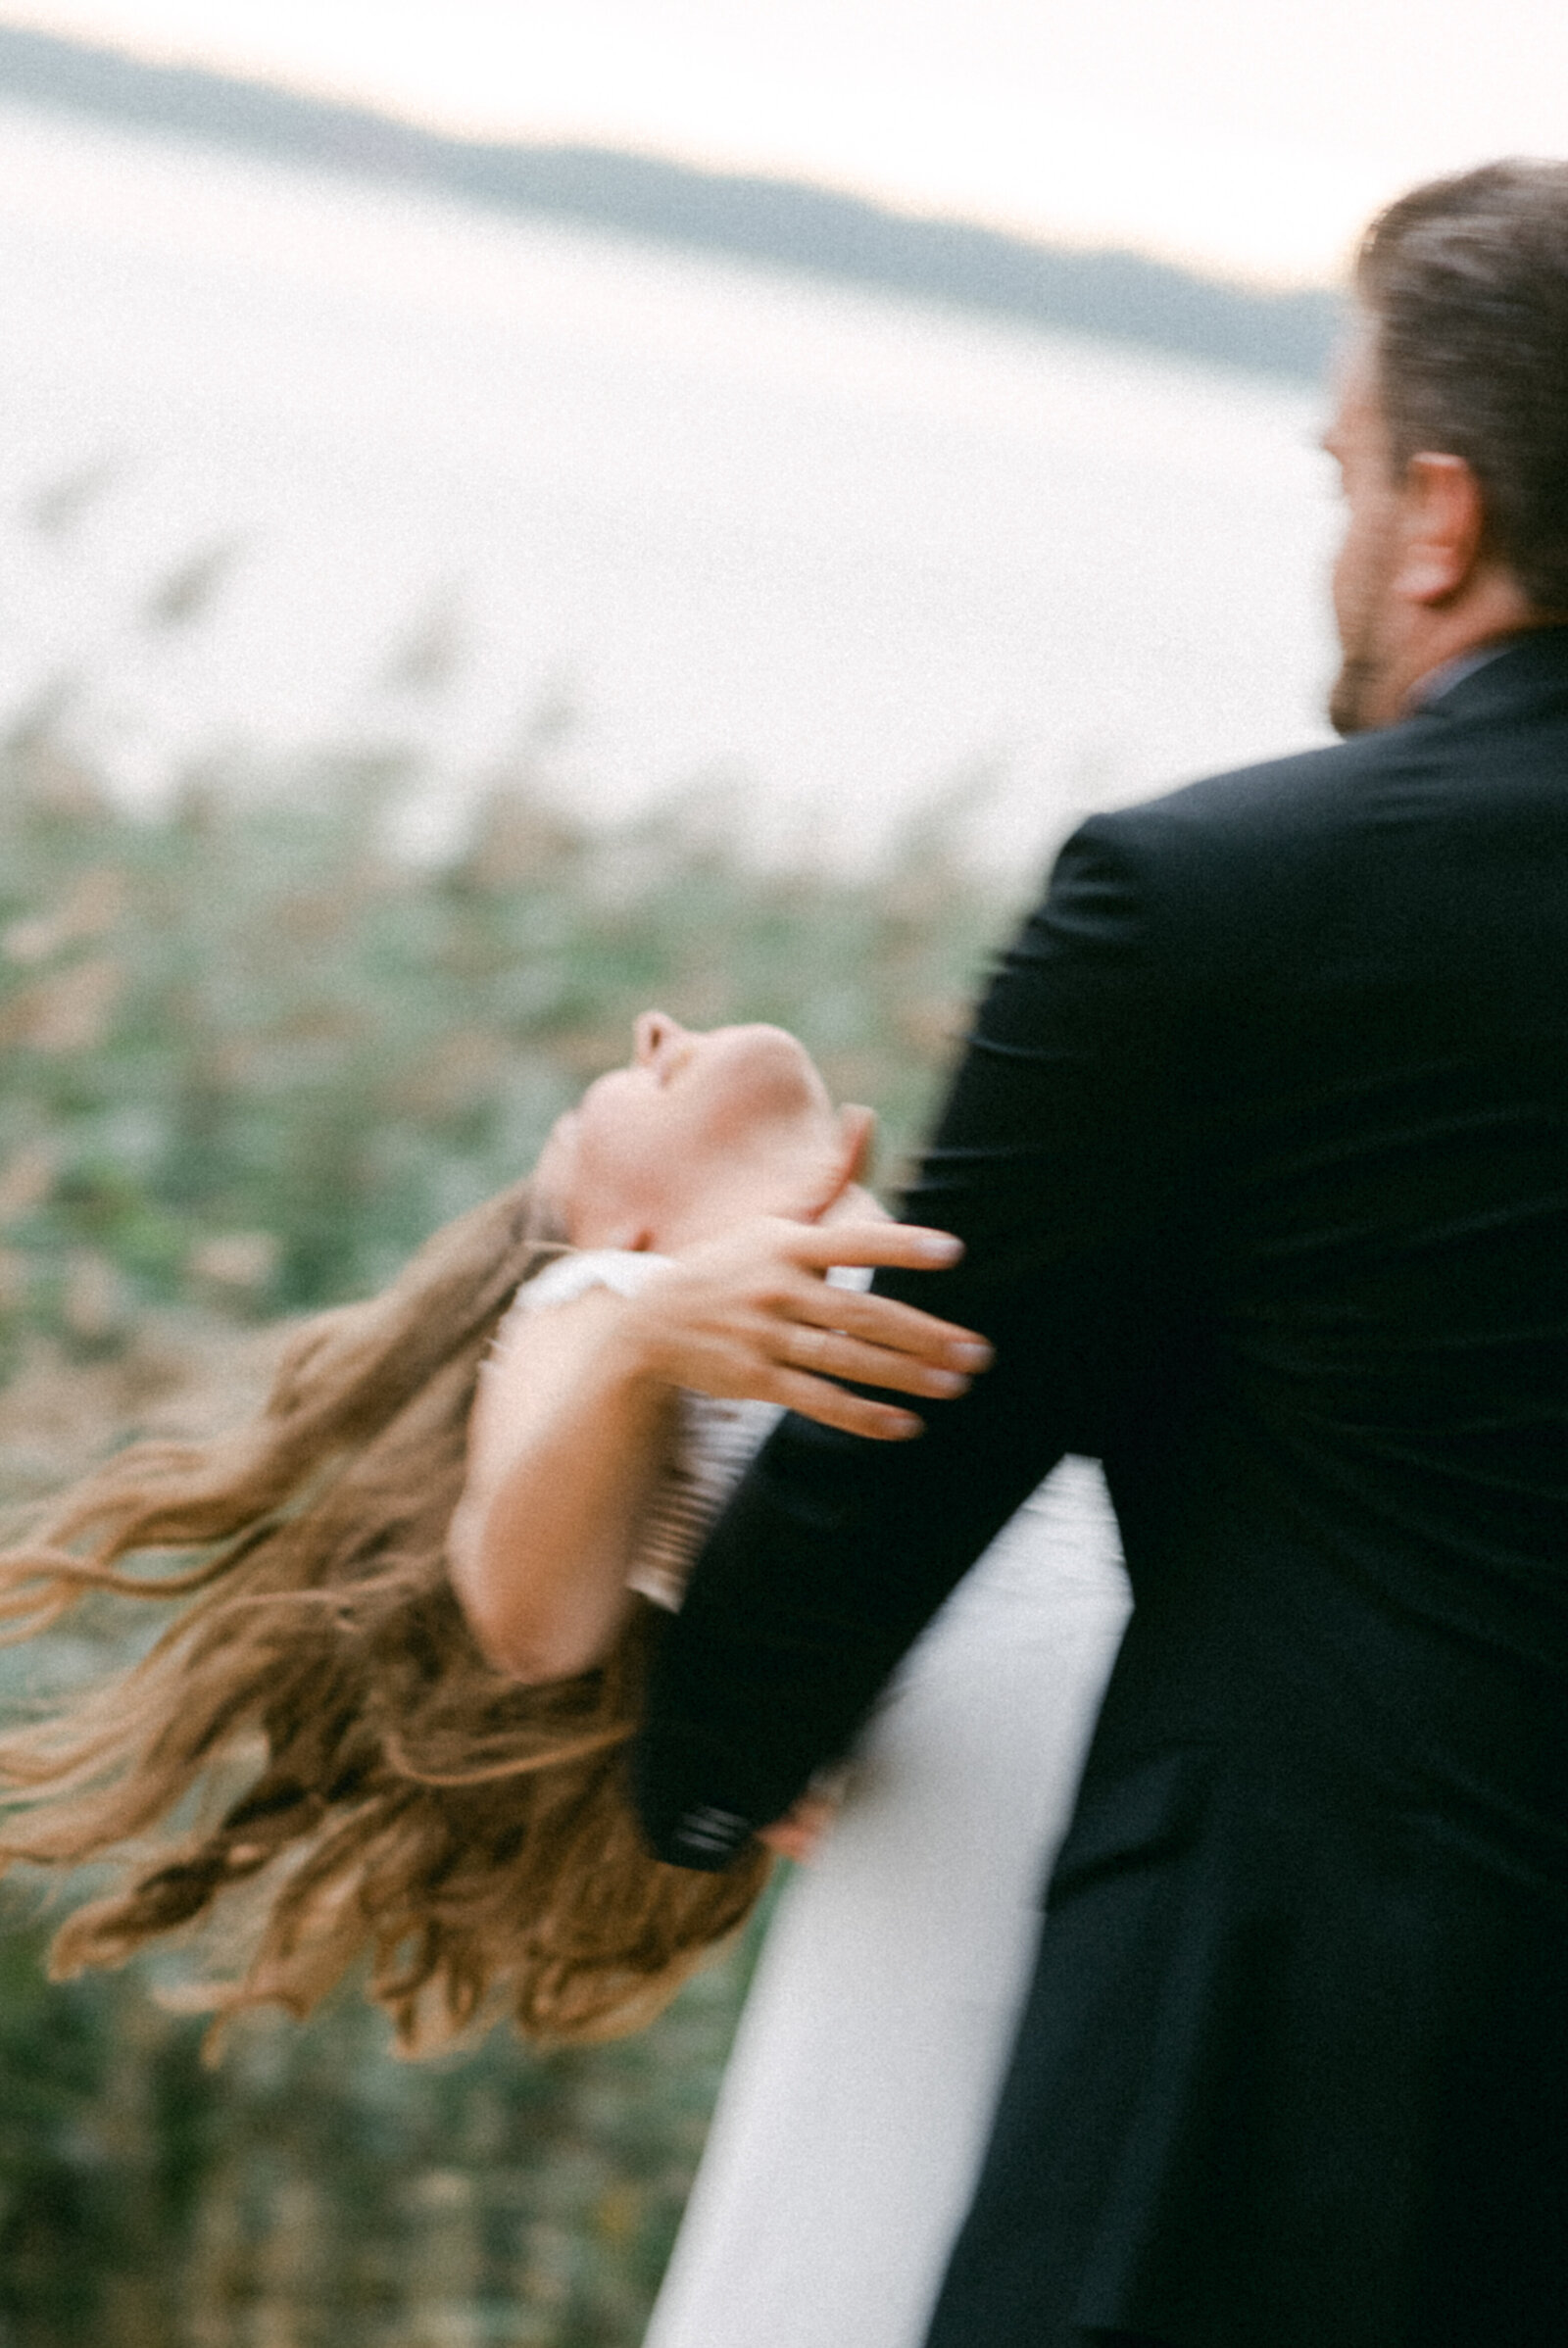 The groom is bending the bride while dancing during their wedding photo shoot with elopement photographer Hannika Gabrielsson.